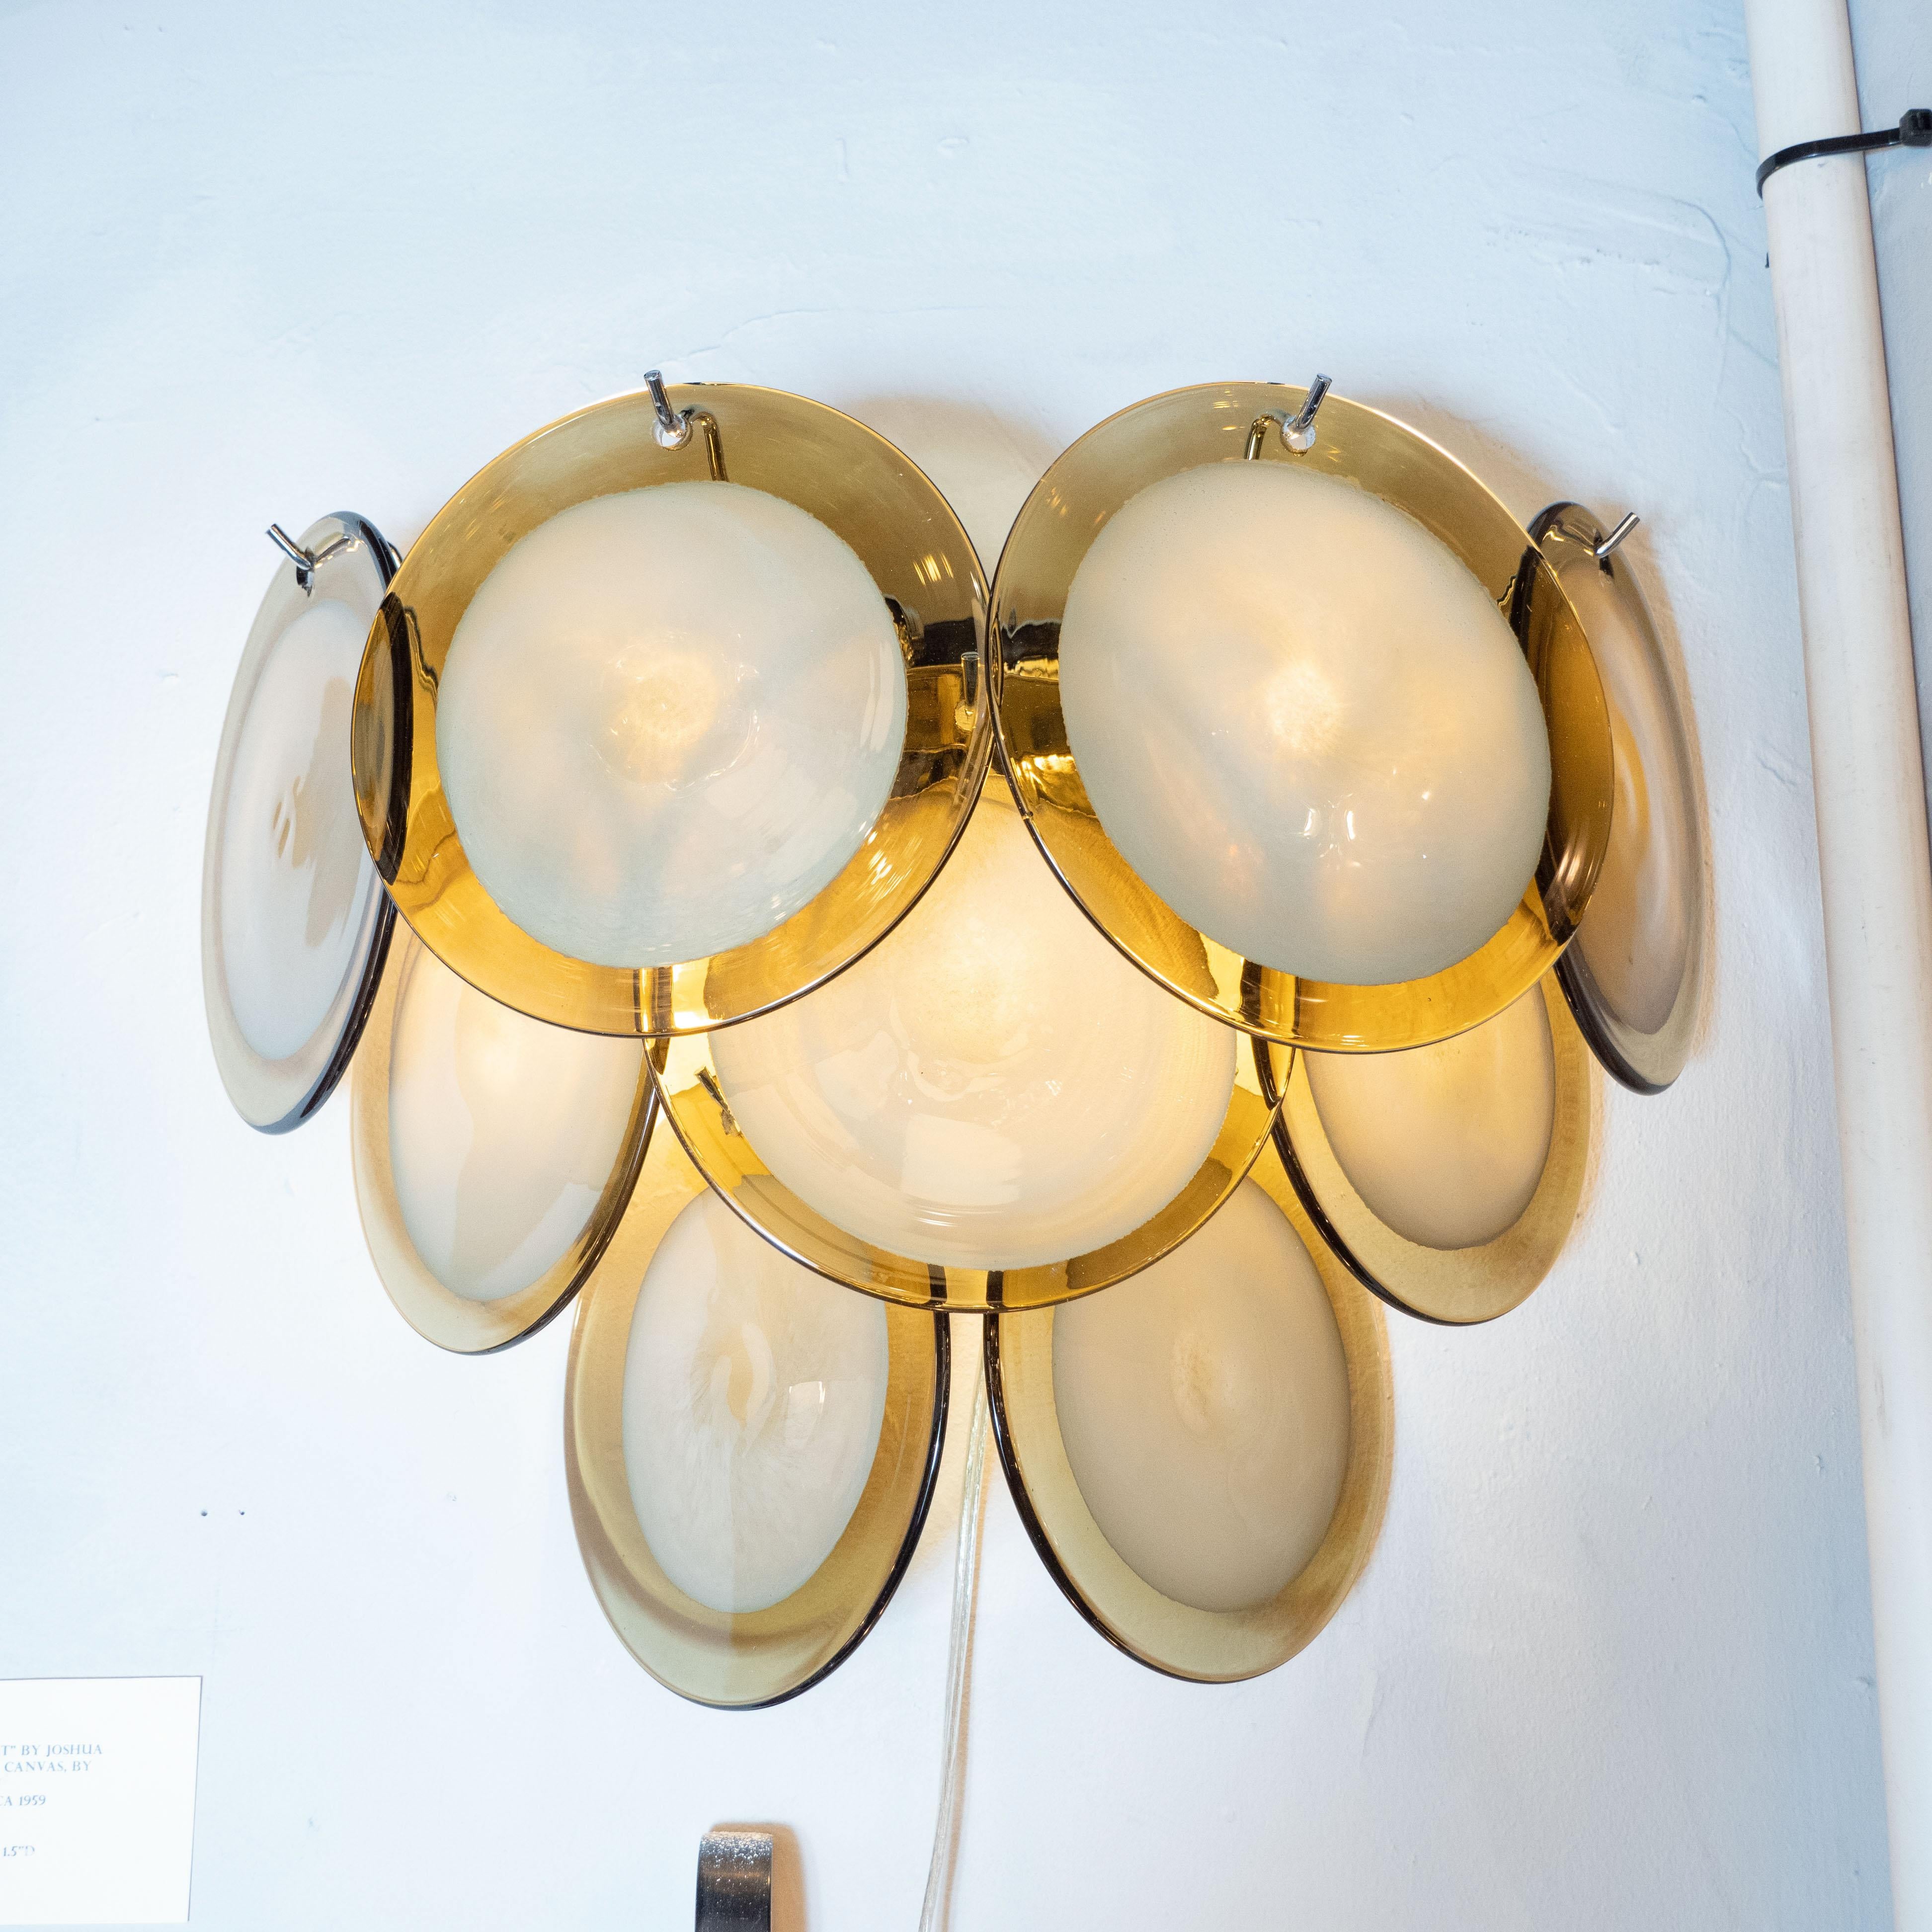 This beautiful pair of modernist 9-disc vistosi sconces were made exclusively for High Style Deco by our atelier in Murano, Italy- the island off the coast of Venice, renowned for centuries for its superlative glass production. Realized in the